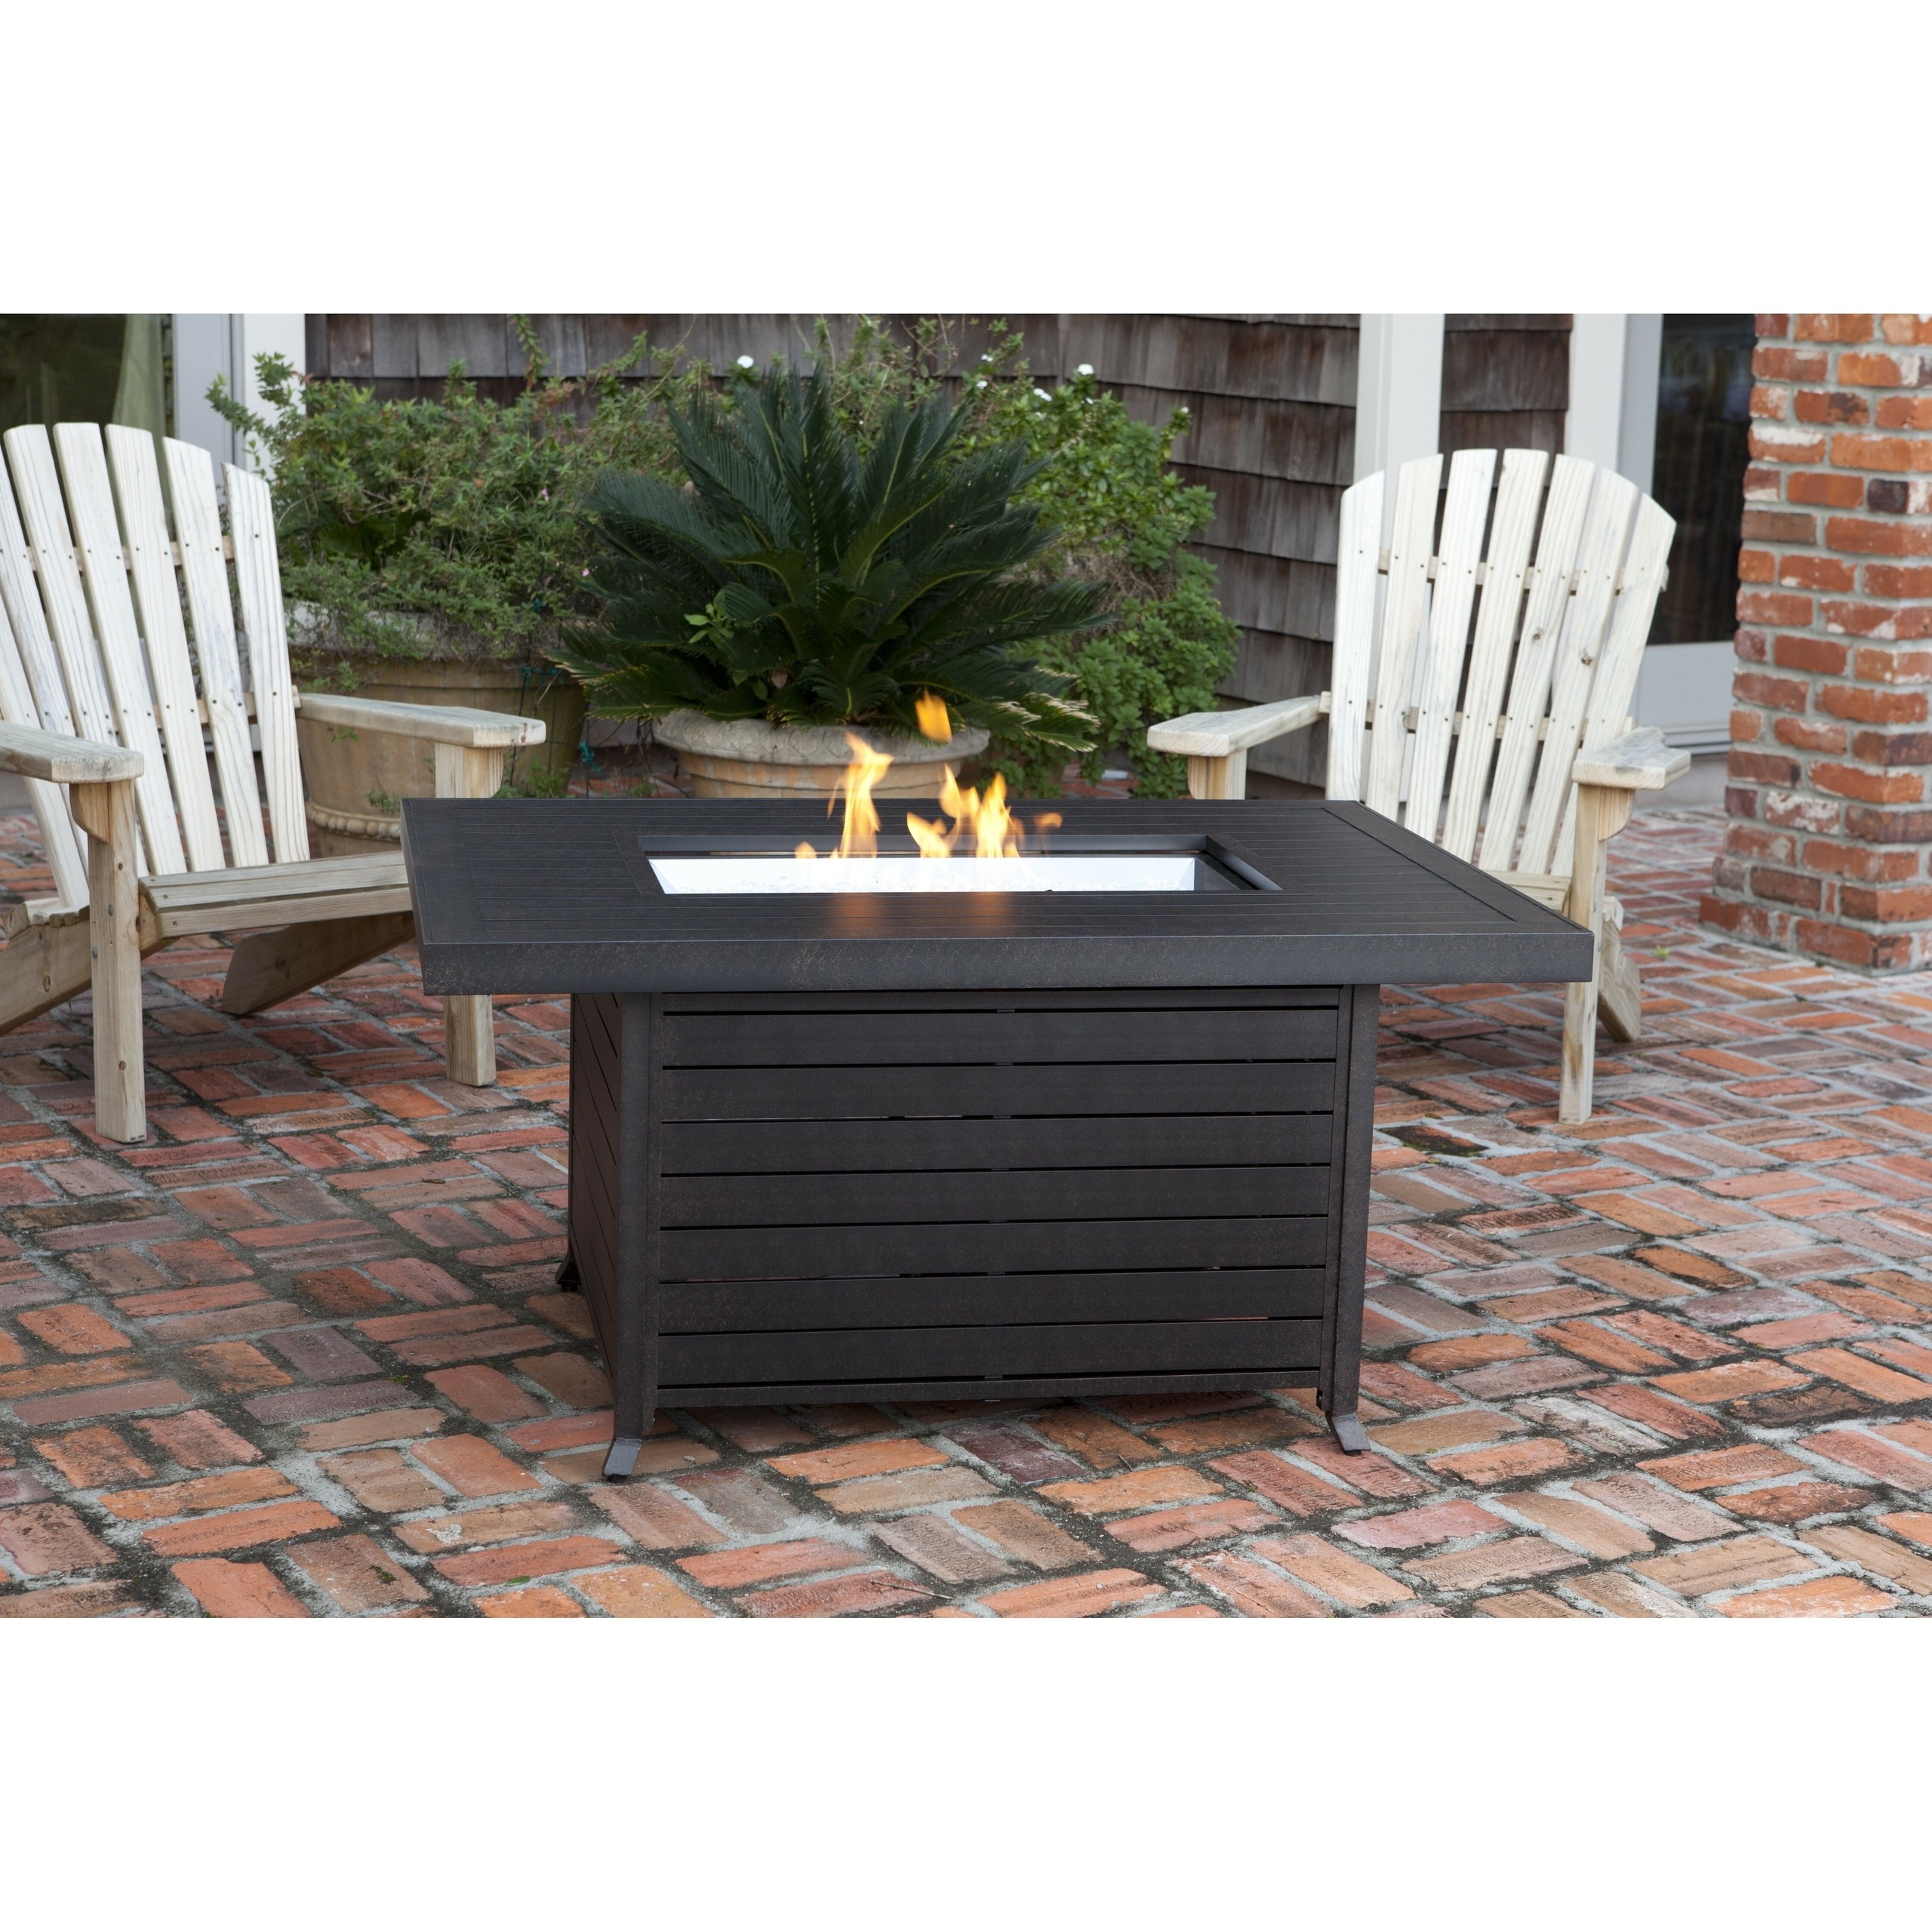 How to Choose an Outdoor Fireplace - Foter